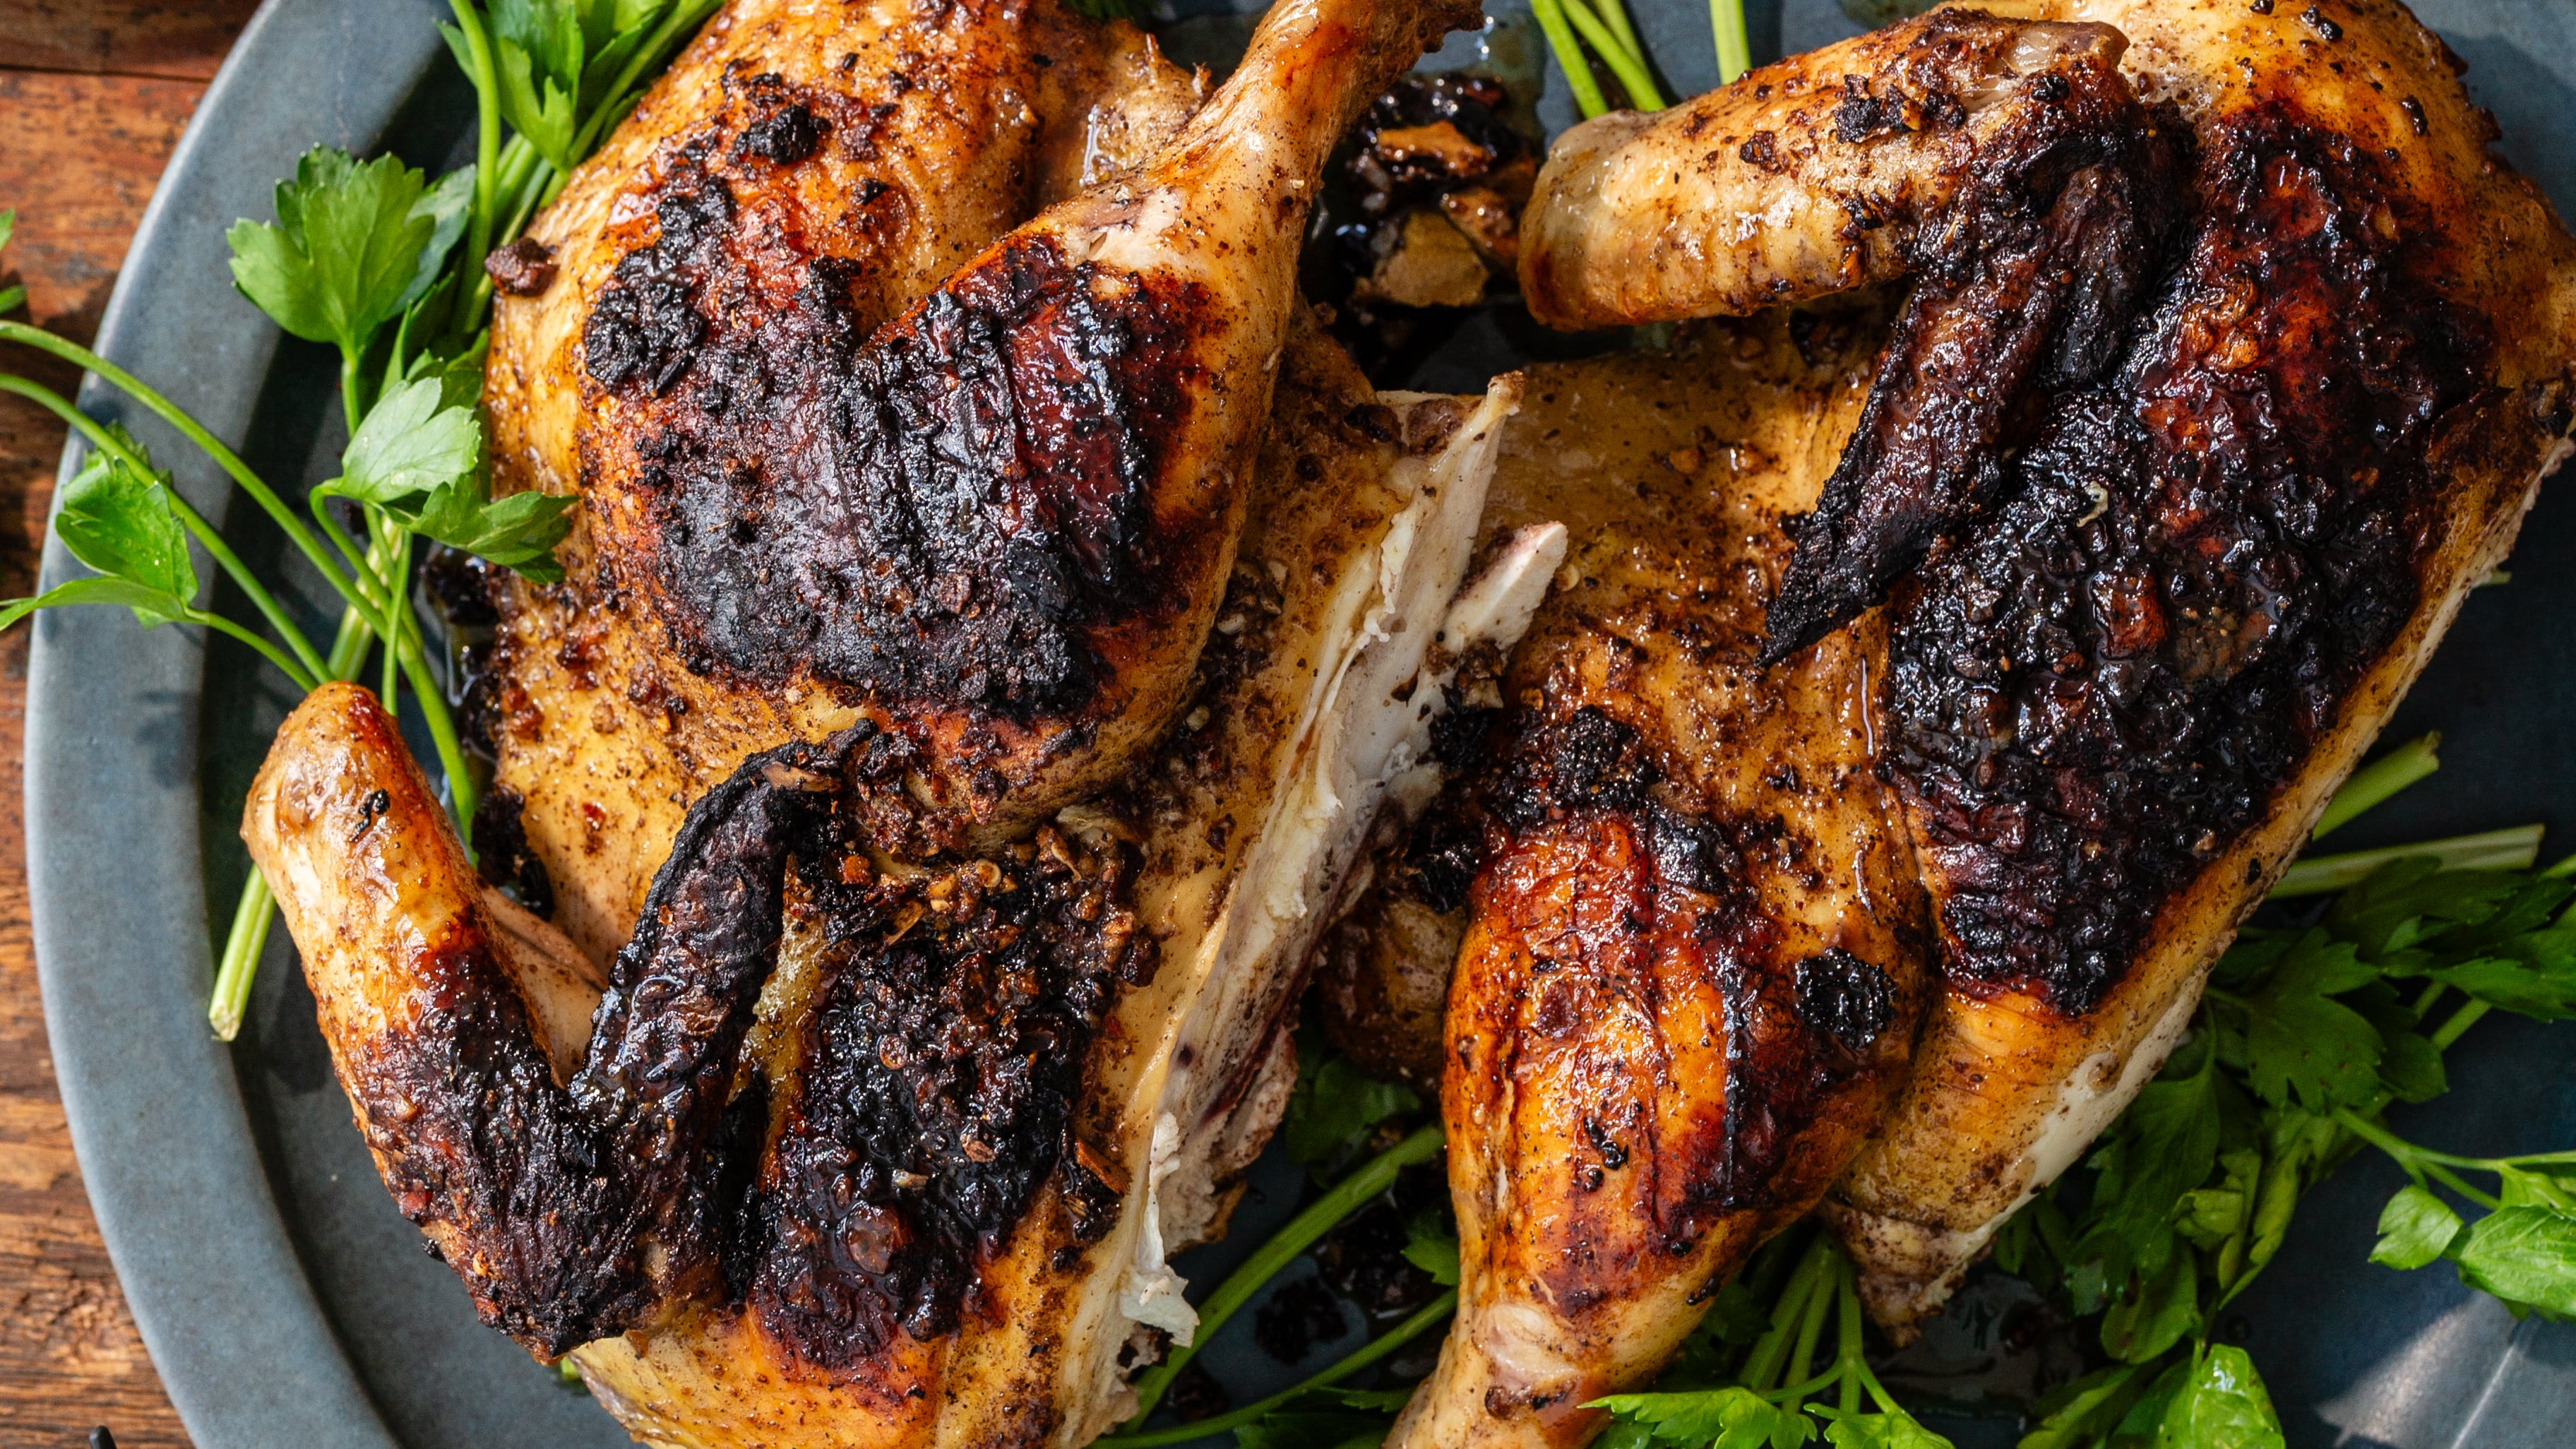 Whole barbecued chicken from Bethlehem